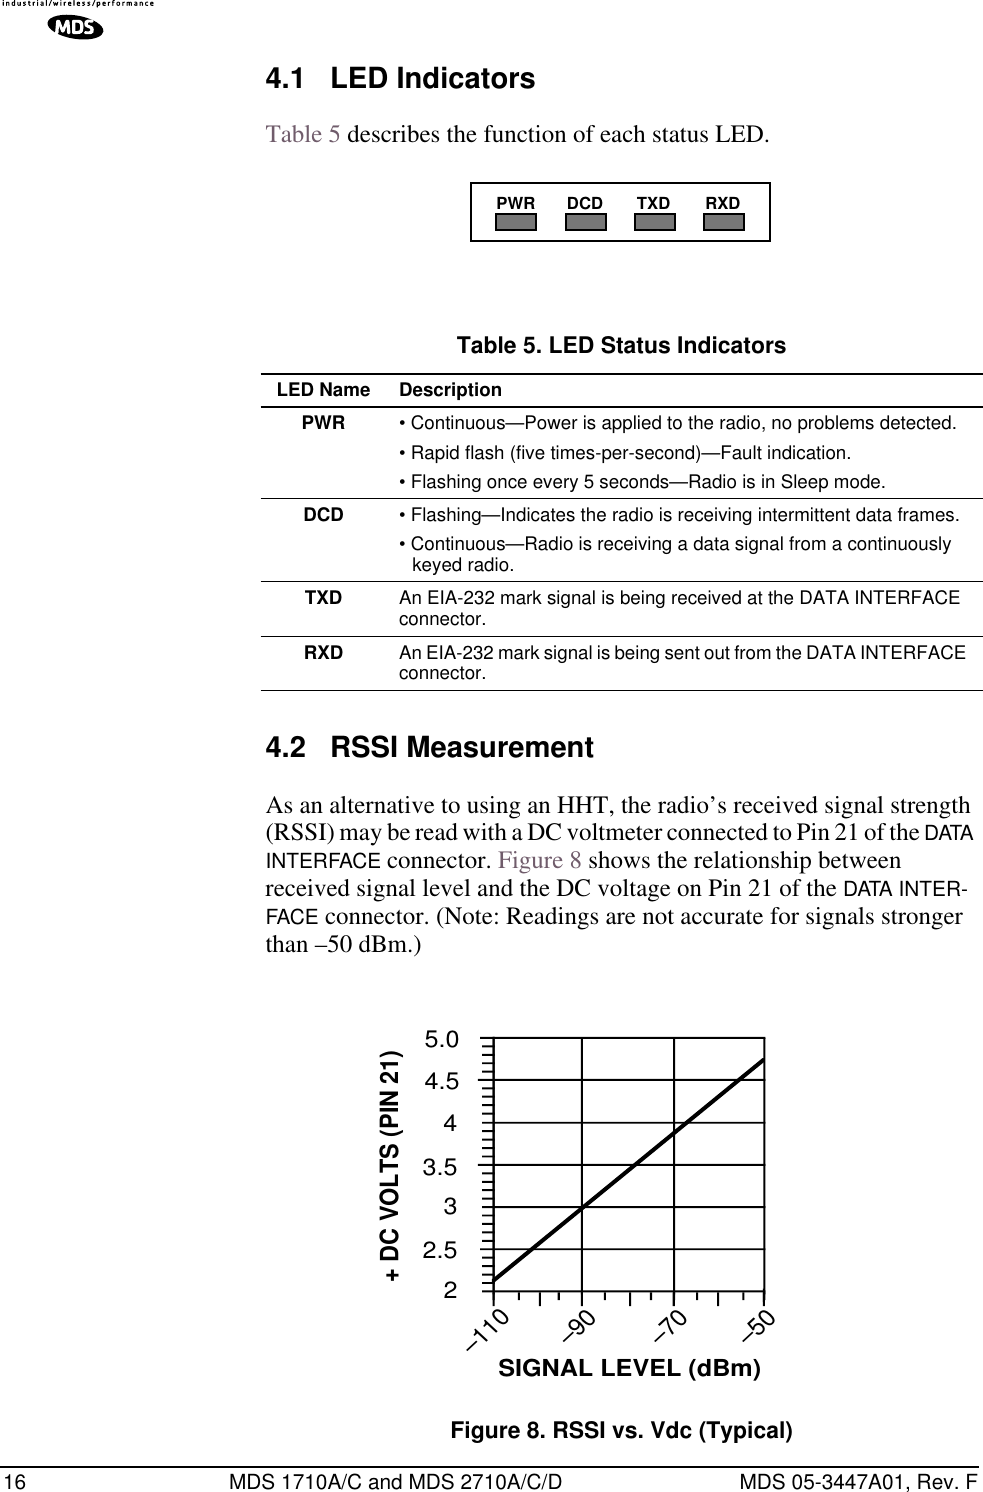 16 MDS 1710A/C and MDS 2710A/C/D MDS 05-3447A01, Rev. F4.1 LED IndicatorsTable 5 describes the function of each status LED.4.2 RSSI MeasurementAs an alternative to using an HHT, the radio’s received signal strength (RSSI) may be read with a DC voltmeter connected to Pin 21 of the DATA INTERFACE connector. Figure 8 shows the relationship between received signal level and the DC voltage on Pin 21 of the DATA INTER-FACE connector. (Note: Readings are not accurate for signals stronger than –50 dBm.)Invisible place holderFigure 8. RSSI vs. Vdc (Typical)PWR DCD TXD RXDTable 5. LED Status Indicators LED Name DescriptionPWR • Continuous—Power is applied to the radio, no problems detected.• Rapid flash (five times-per-second)—Fault indication.• Flashing once every 5 seconds—Radio is in Sleep mode.DCD • Flashing—Indicates the radio is receiving intermittent data frames.• Continuous—Radio is receiving a data signal from a continuously keyed radio.TXD An EIA-232 mark signal is being received at the DATA INTERFACE connector.RXD An EIA-232 mark signal is being sent out from the DATA INTERFACE connector.22.533.54–110–90–70–50+ DC VOLTS (PIN 21)SIGNAL LEVEL (dBm)4.55.0